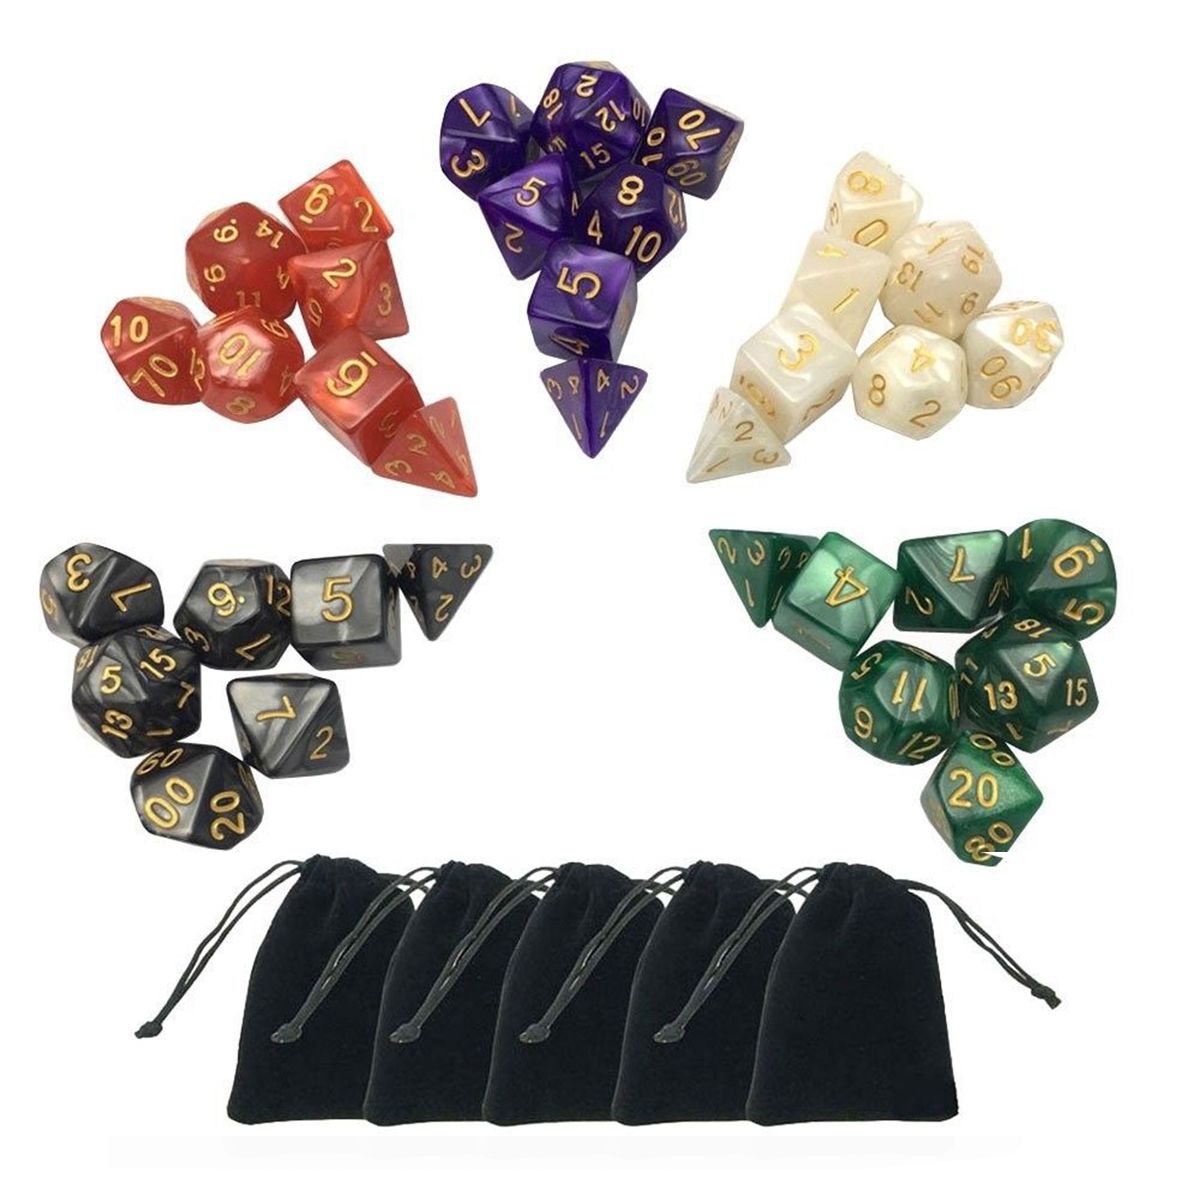 35Pcs-Multisided-Dices-Set-Polyhedral-Dice-Role-Playing-Games-Gadget-5-Colors-1262483